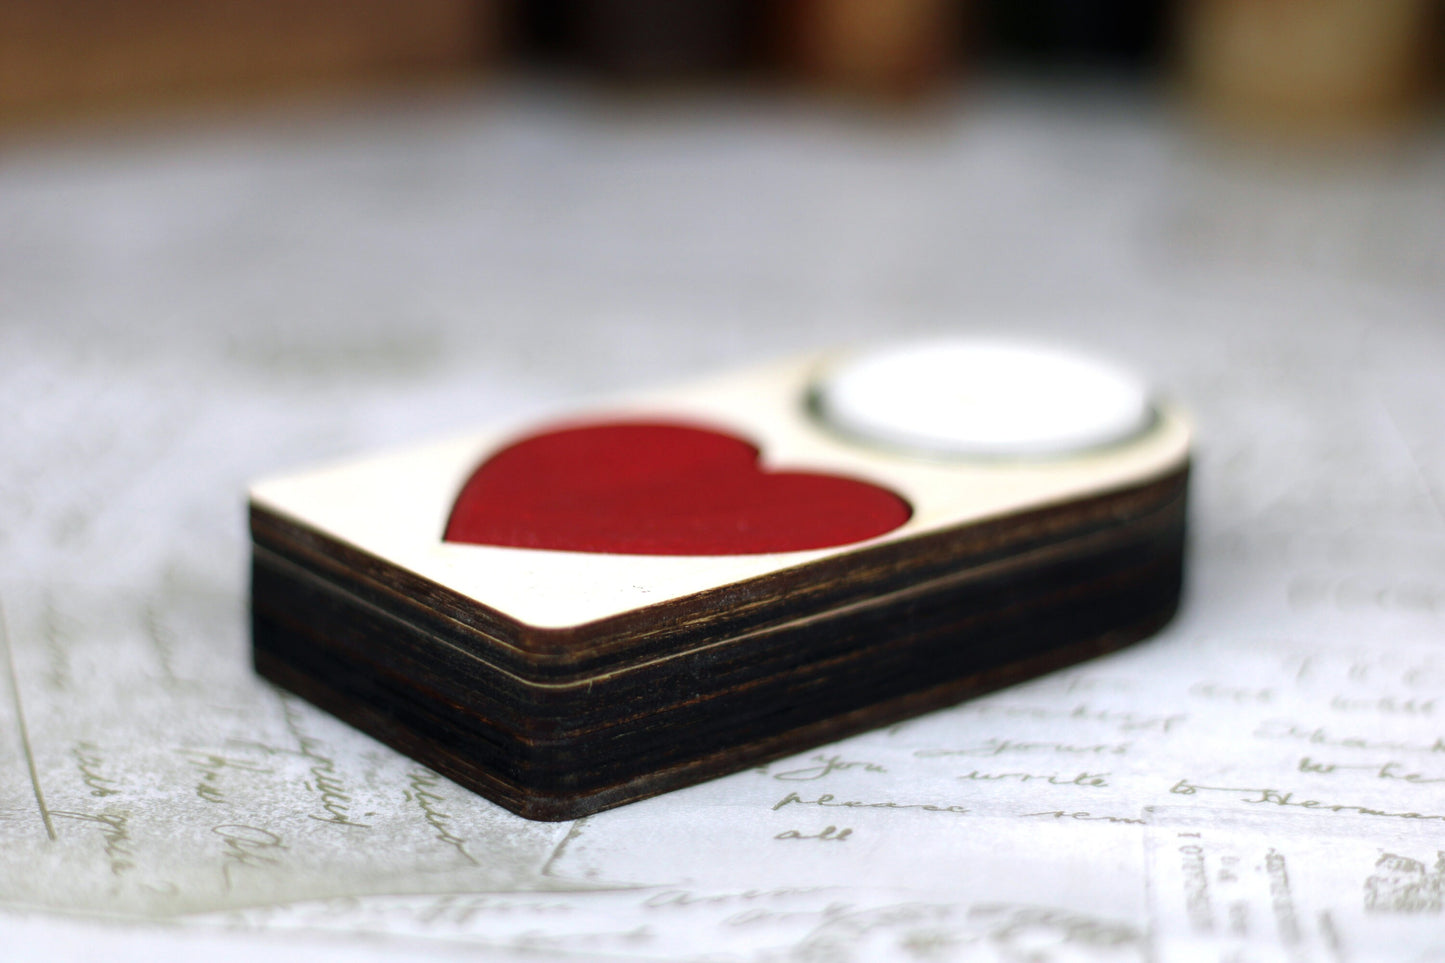 Engraved wooden candle holder with red heart motif and secret compartment, it holds tea light candle or nightlight